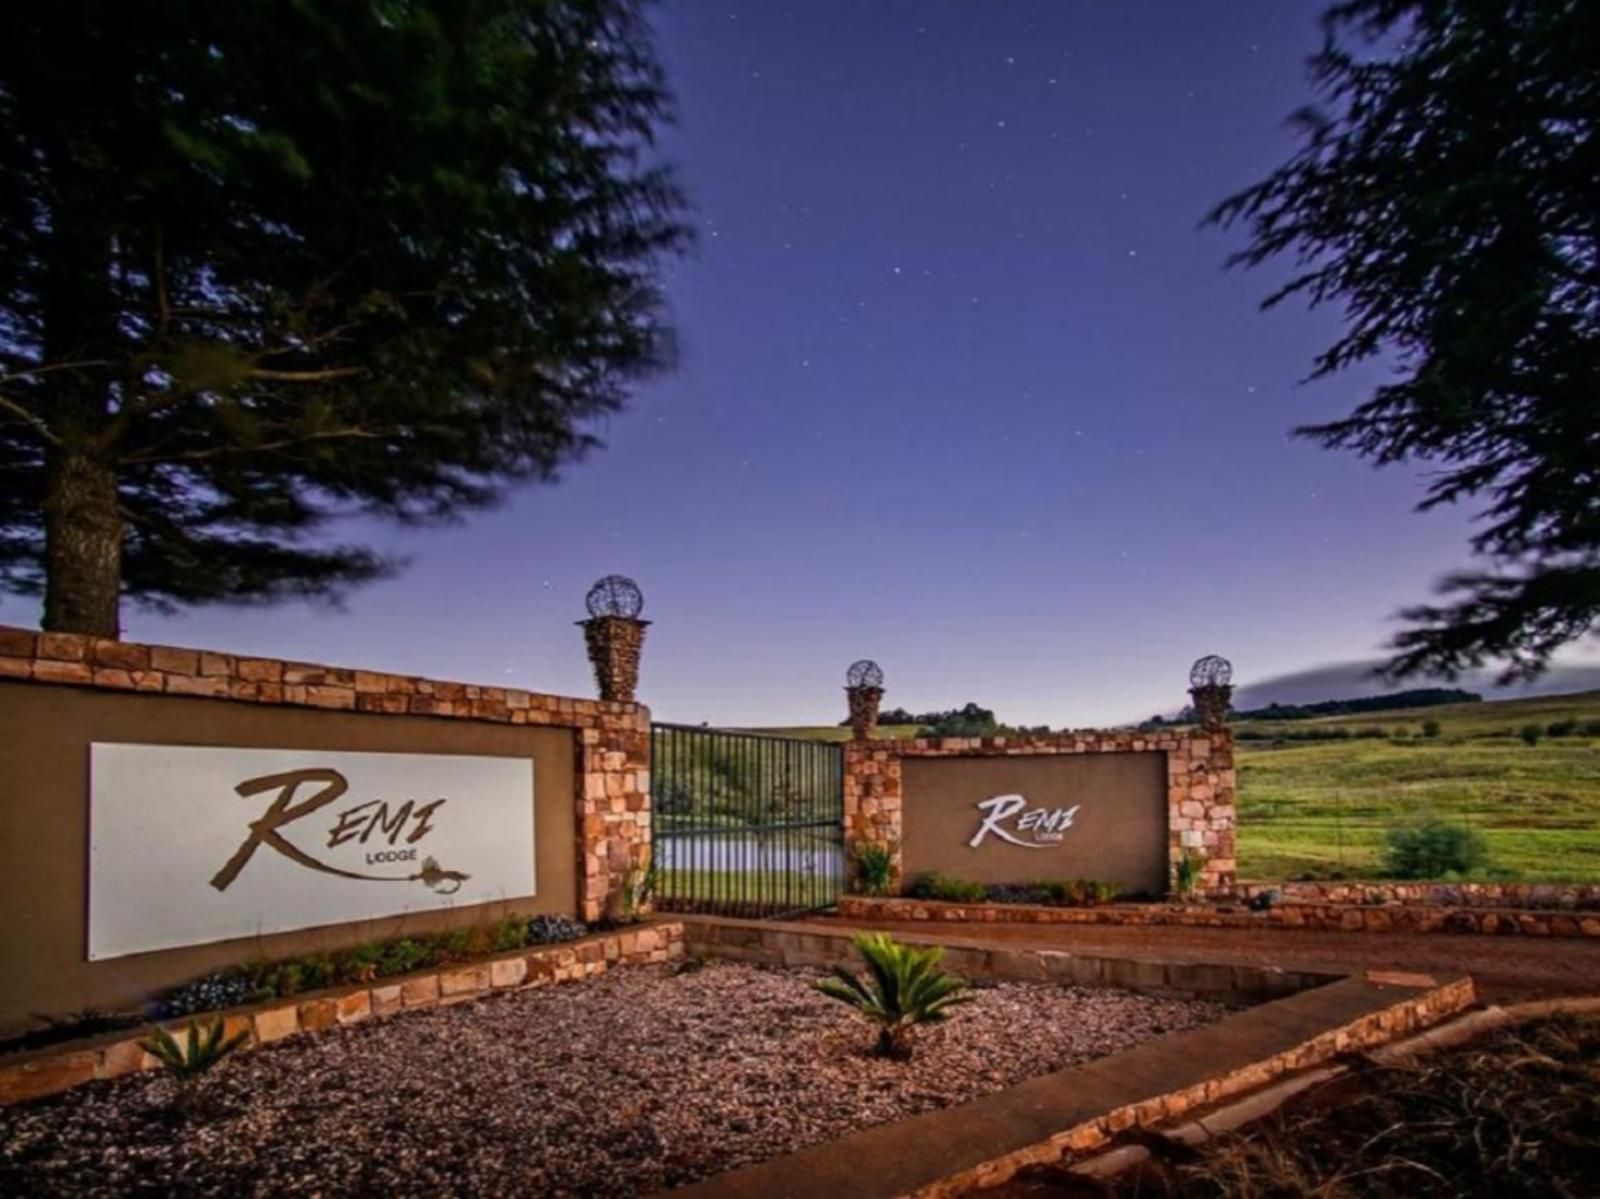 Remi Lodge Dullstroom Mpumalanga South Africa Complementary Colors